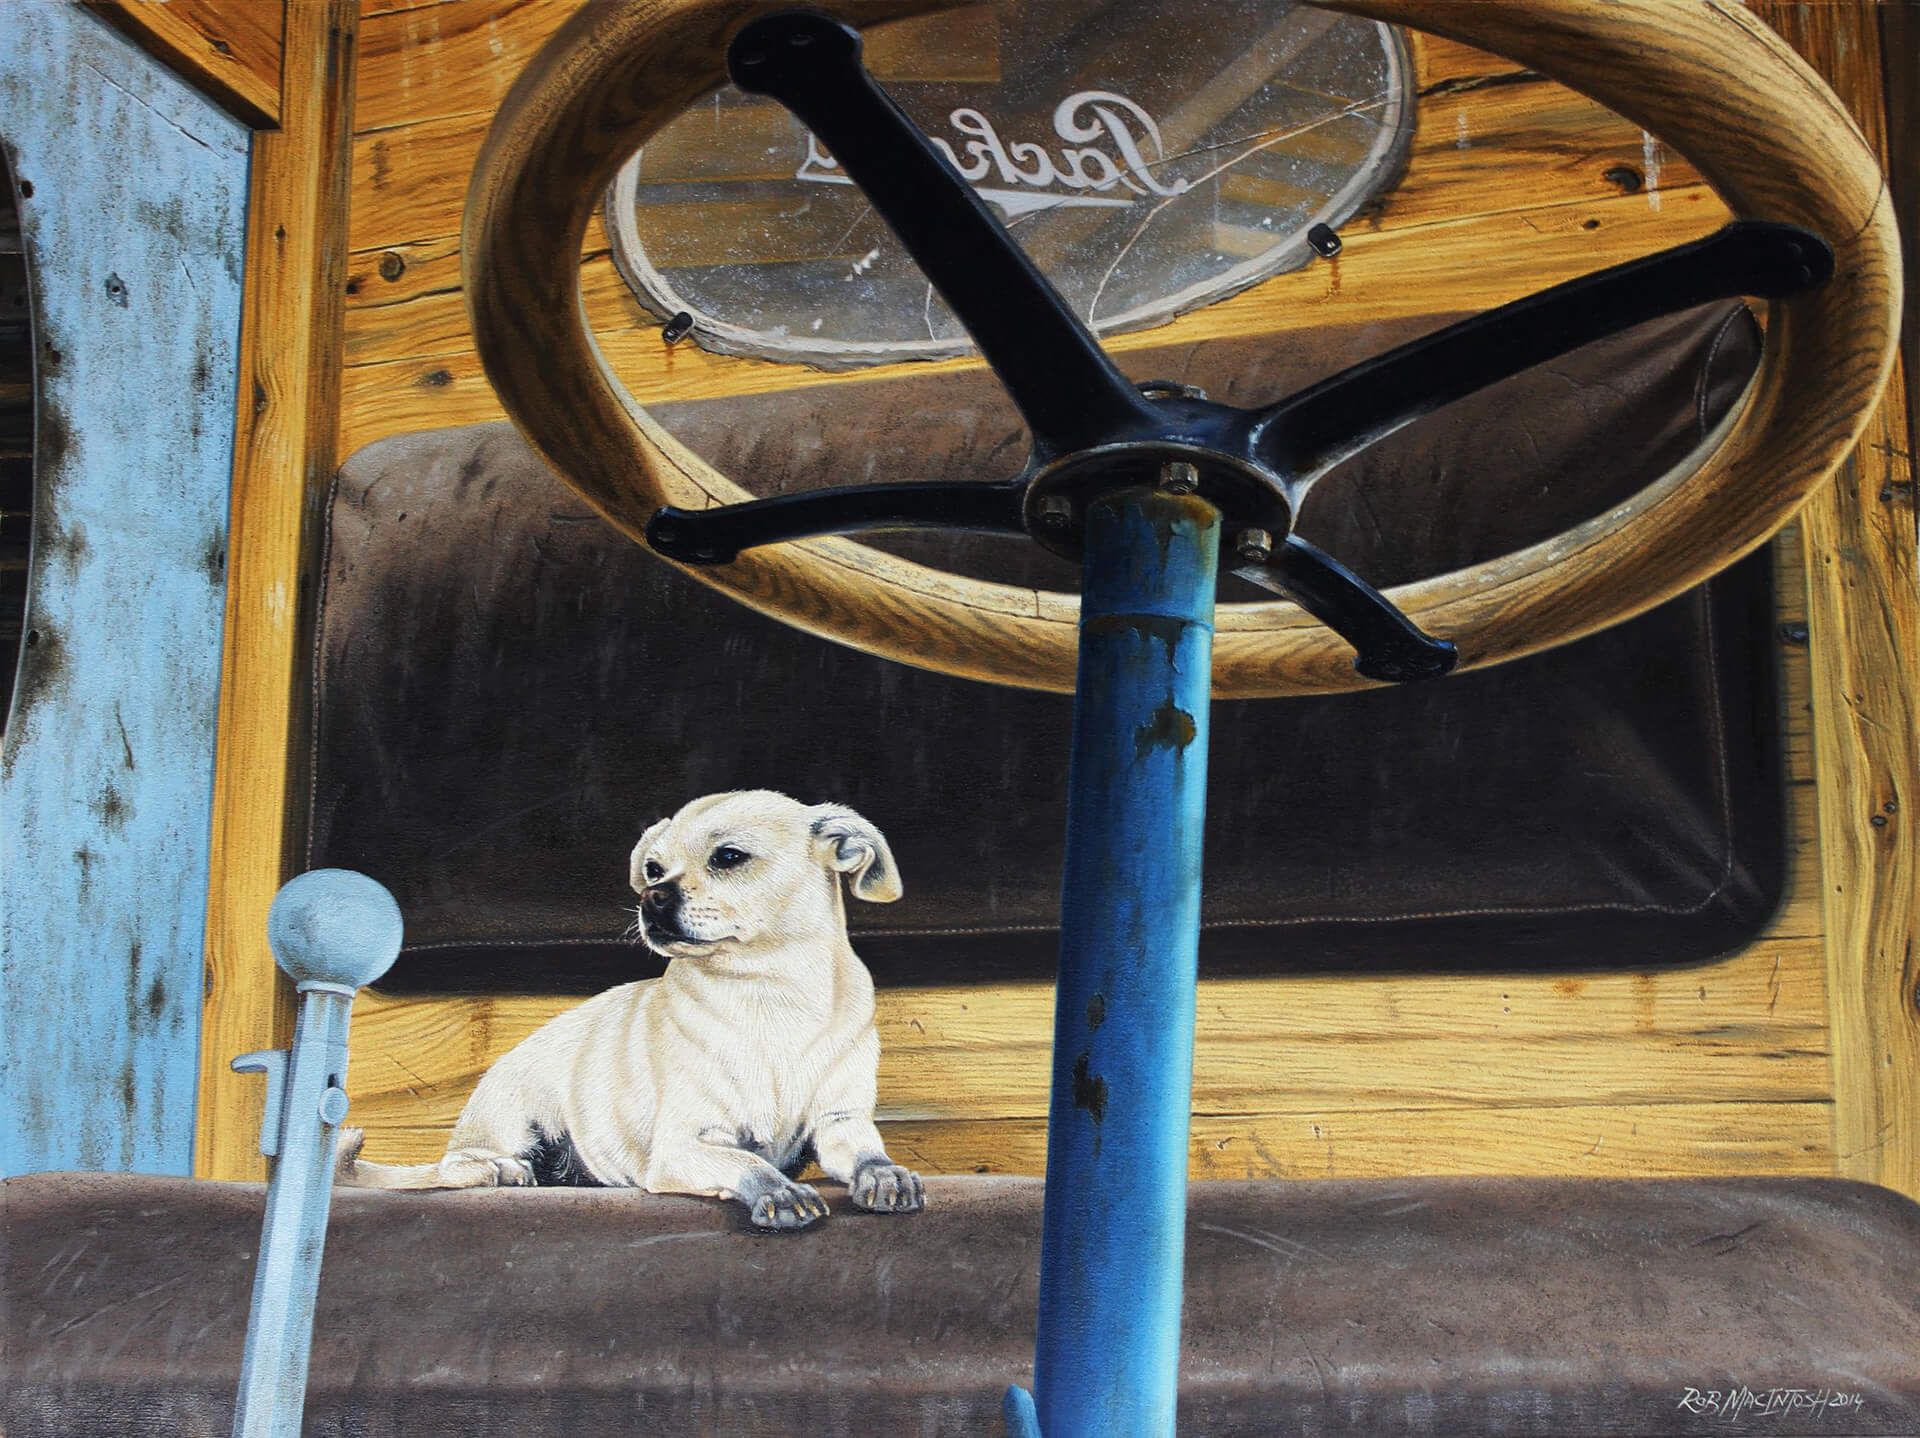 Photorealistic painting of a dog sitting on seat of a tractor